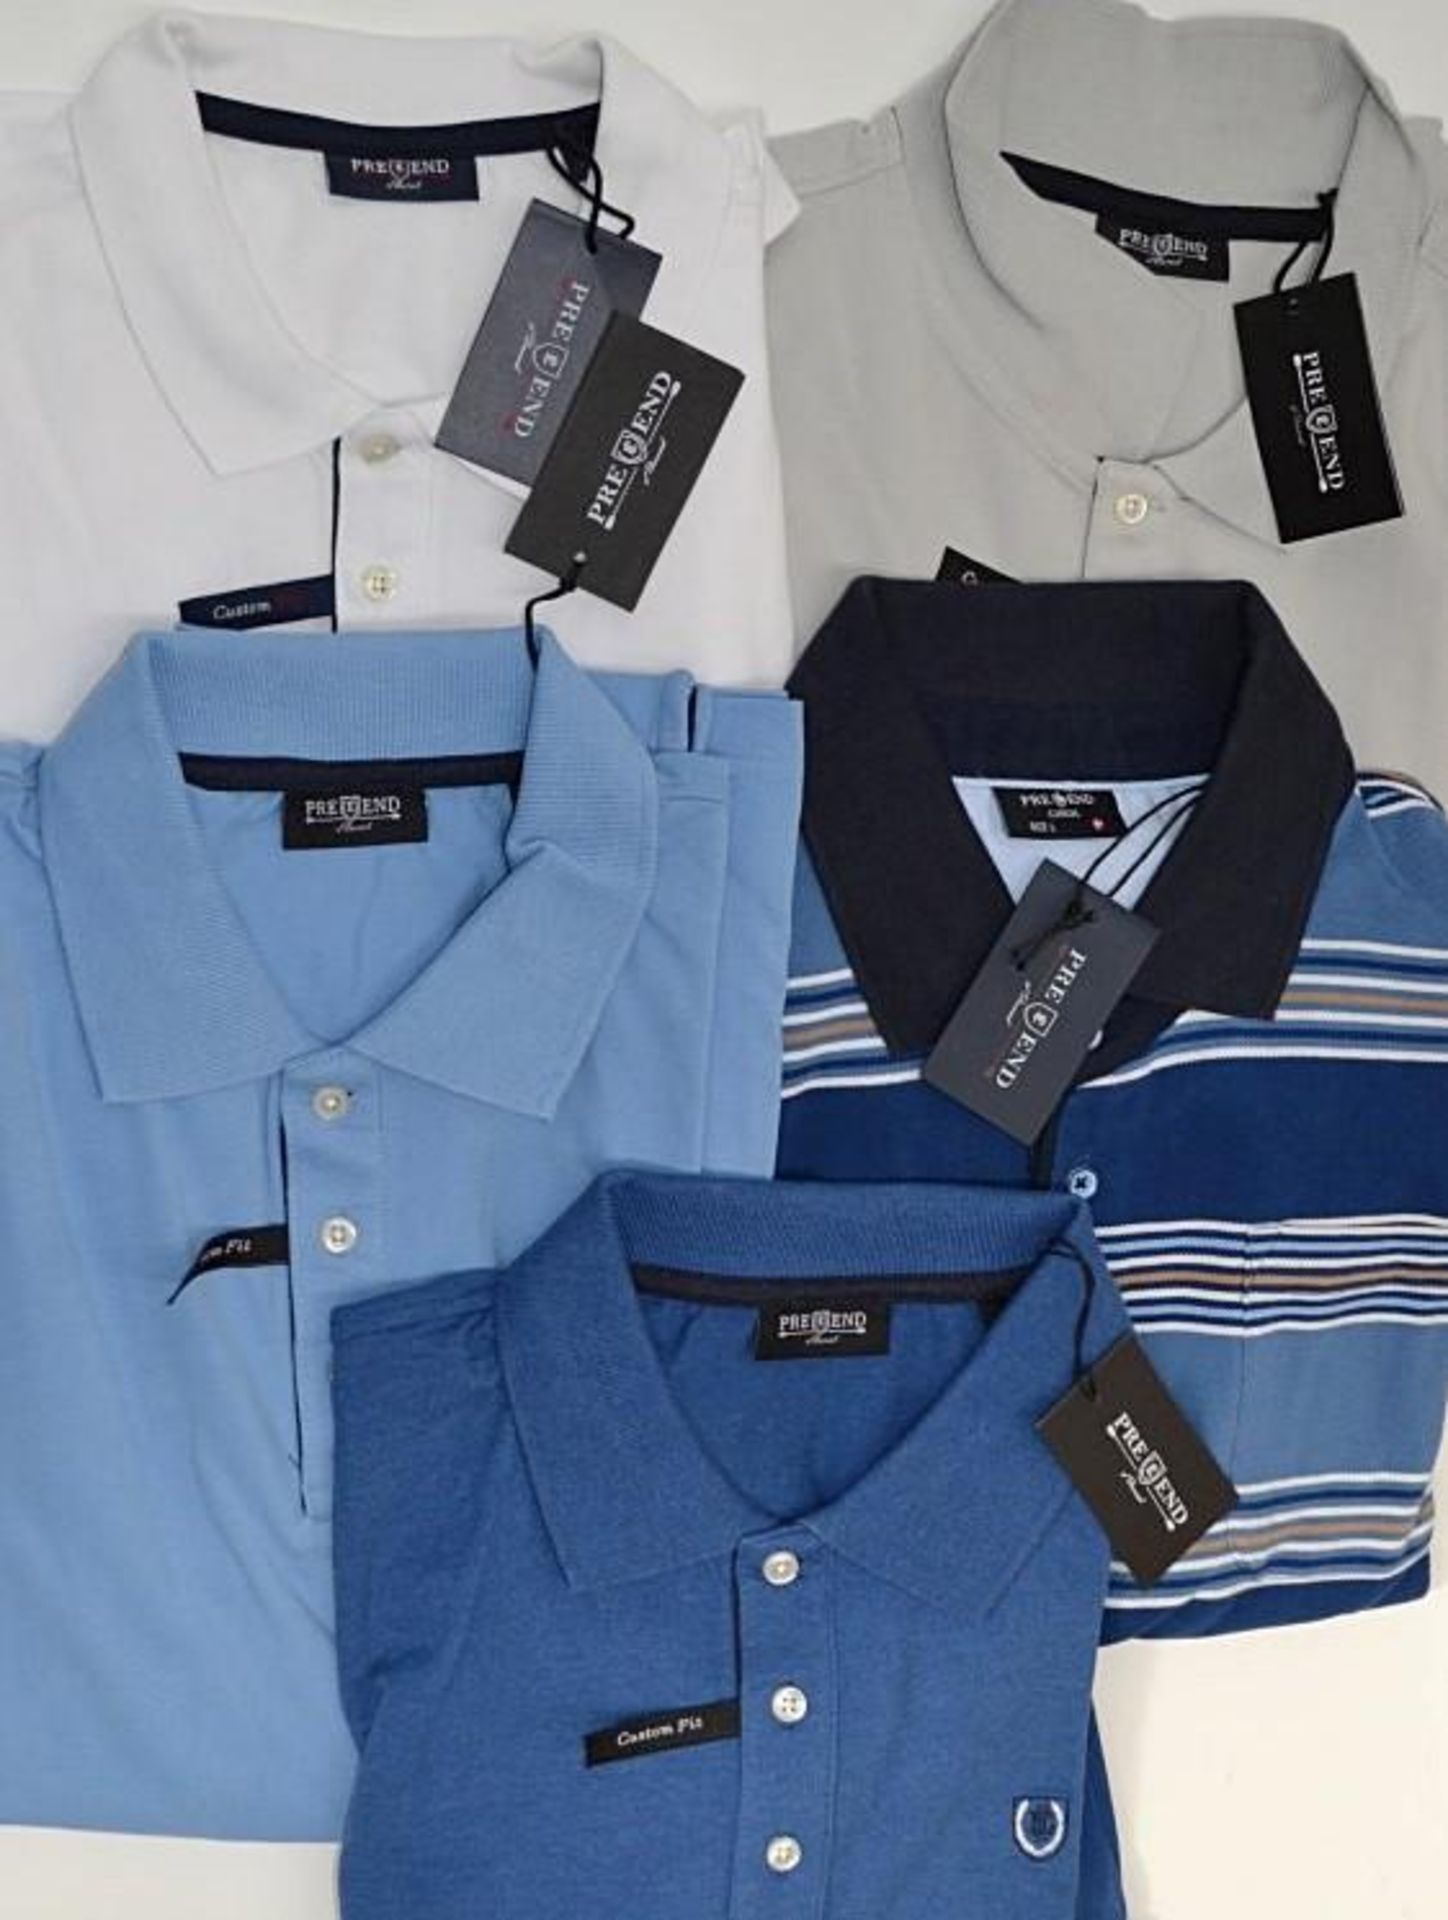 5 x Assorted Pre End Branded Mens Short Sleeve Polo Shirts - New Stock With Tags - Recent Retail - Image 2 of 5